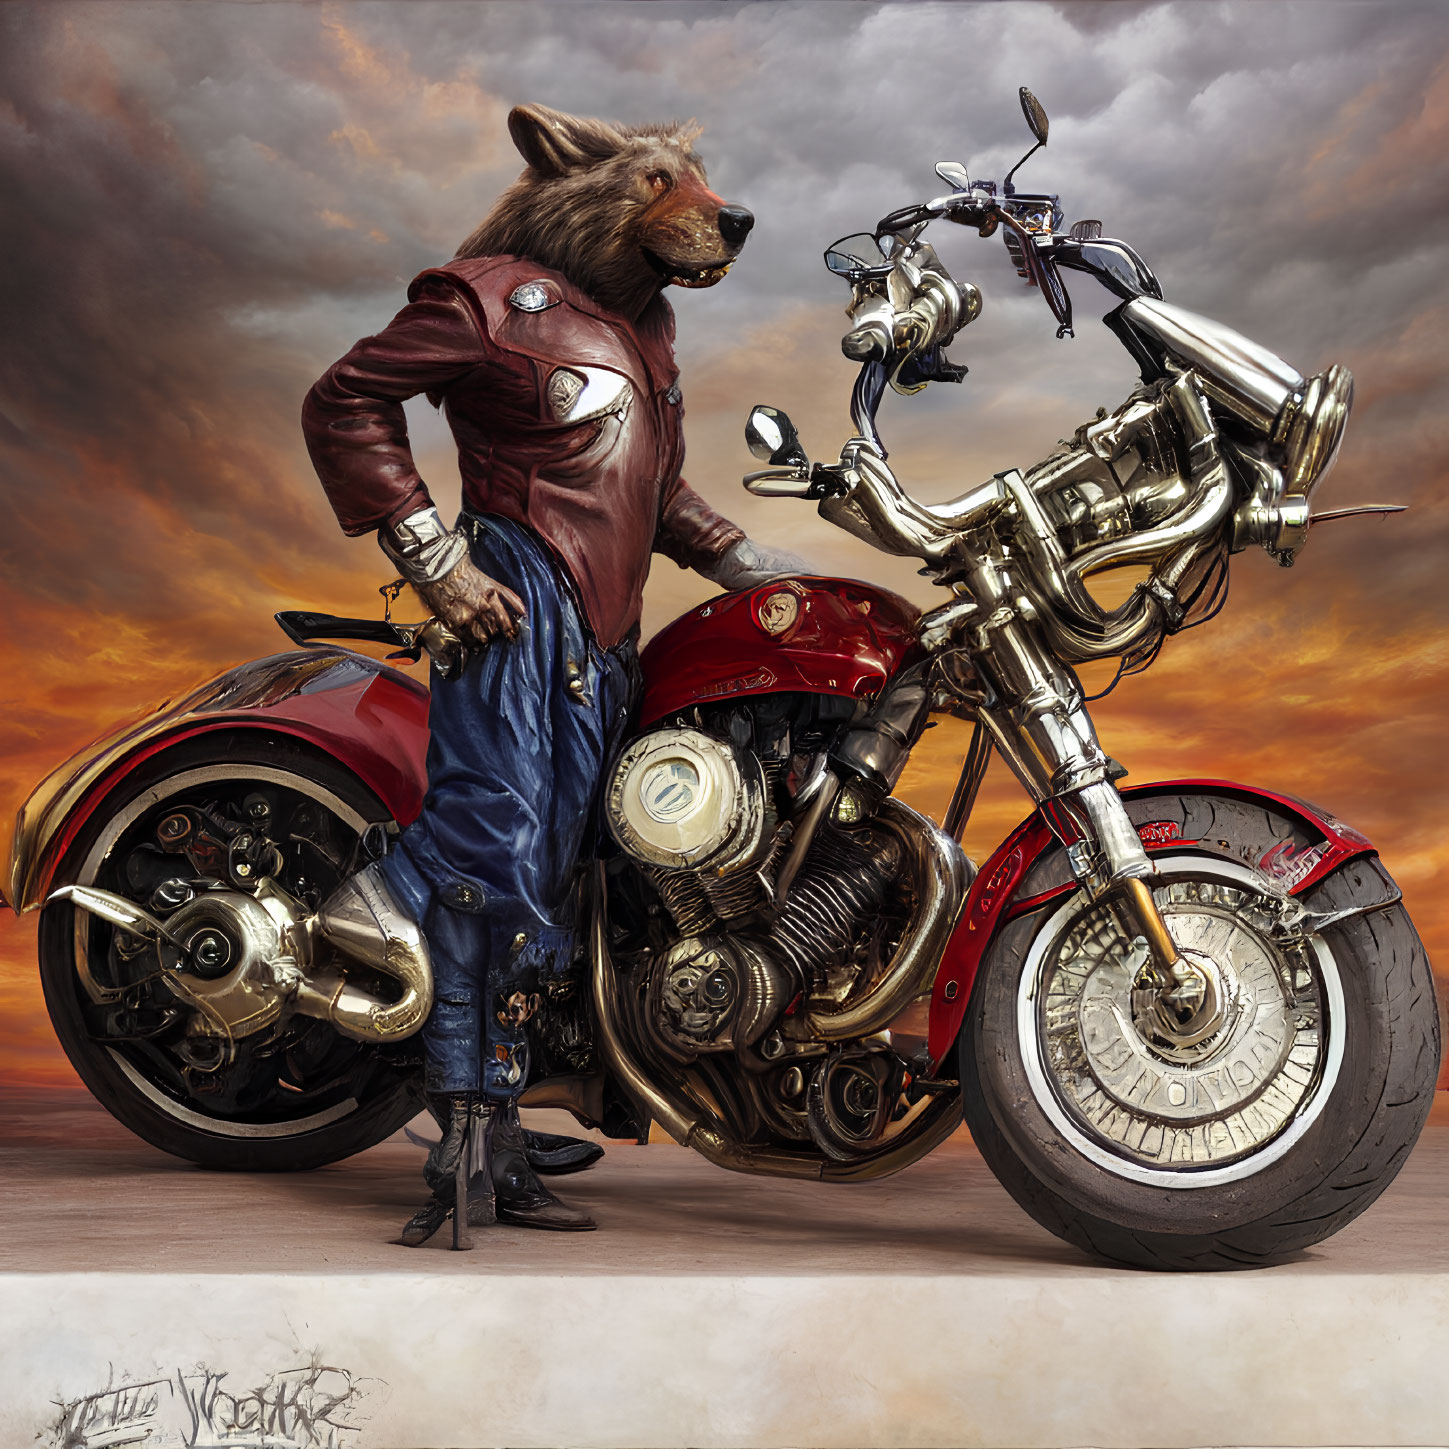 Anthropomorphic raccoon in red leather jacket next to custom motorcycle